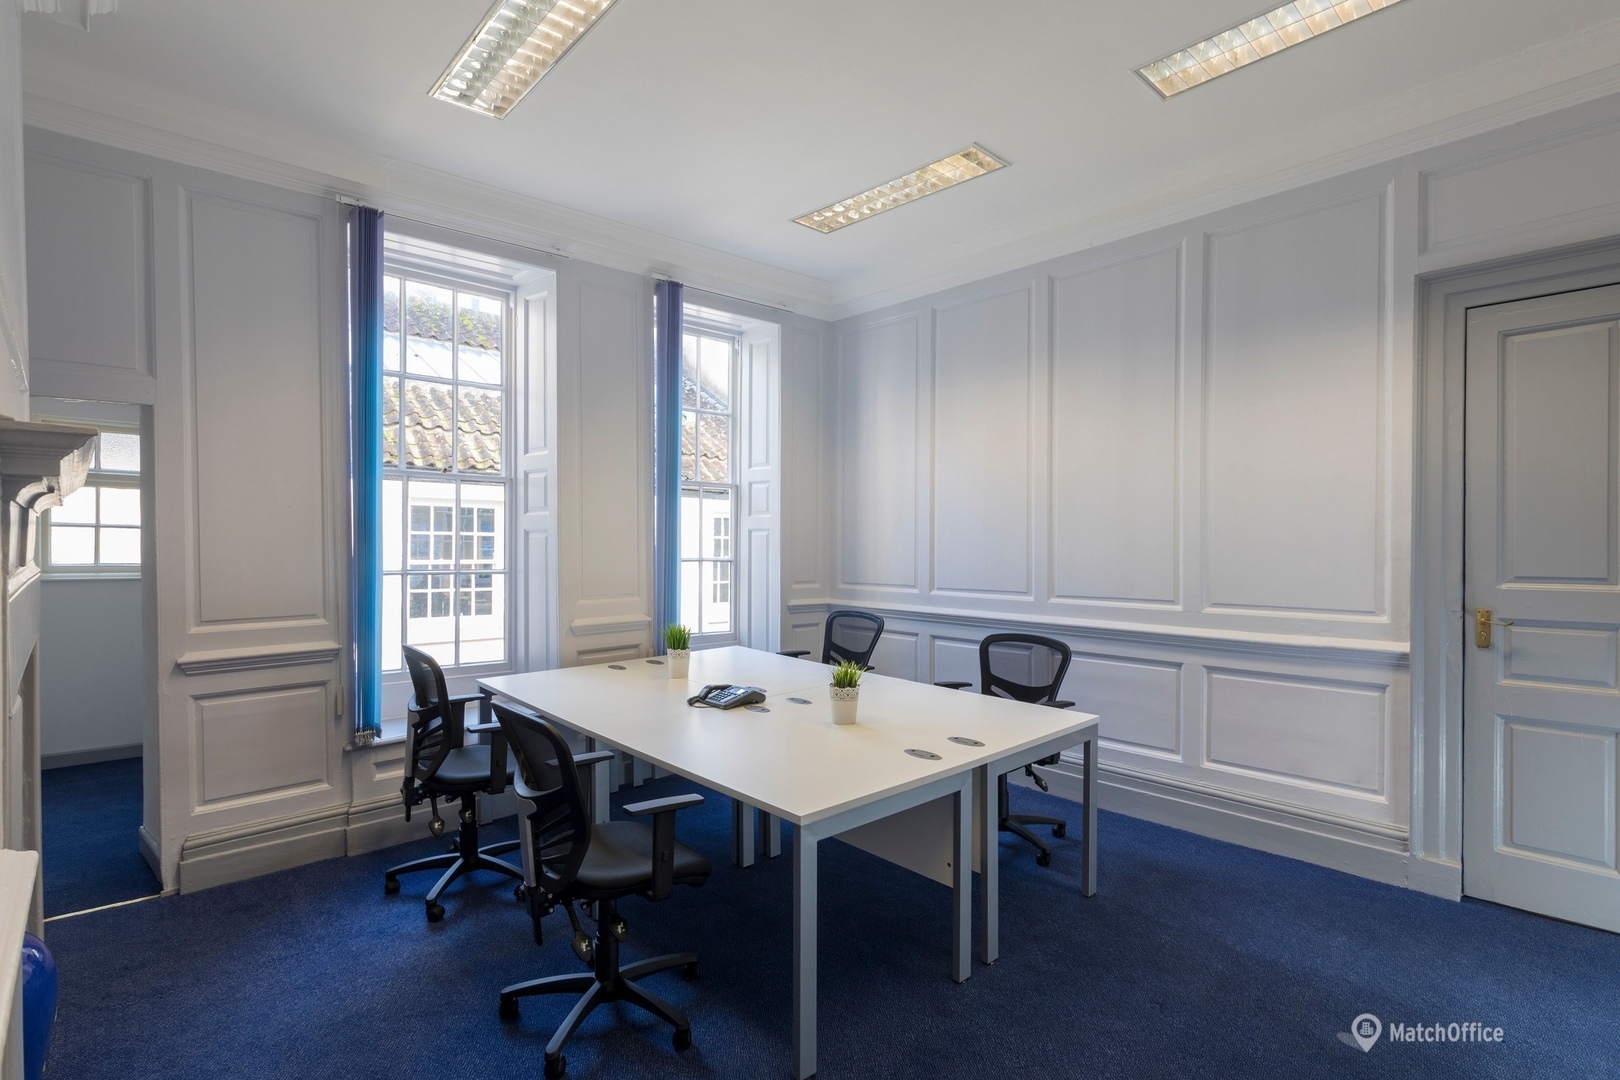 Offices to Rent in Bristol